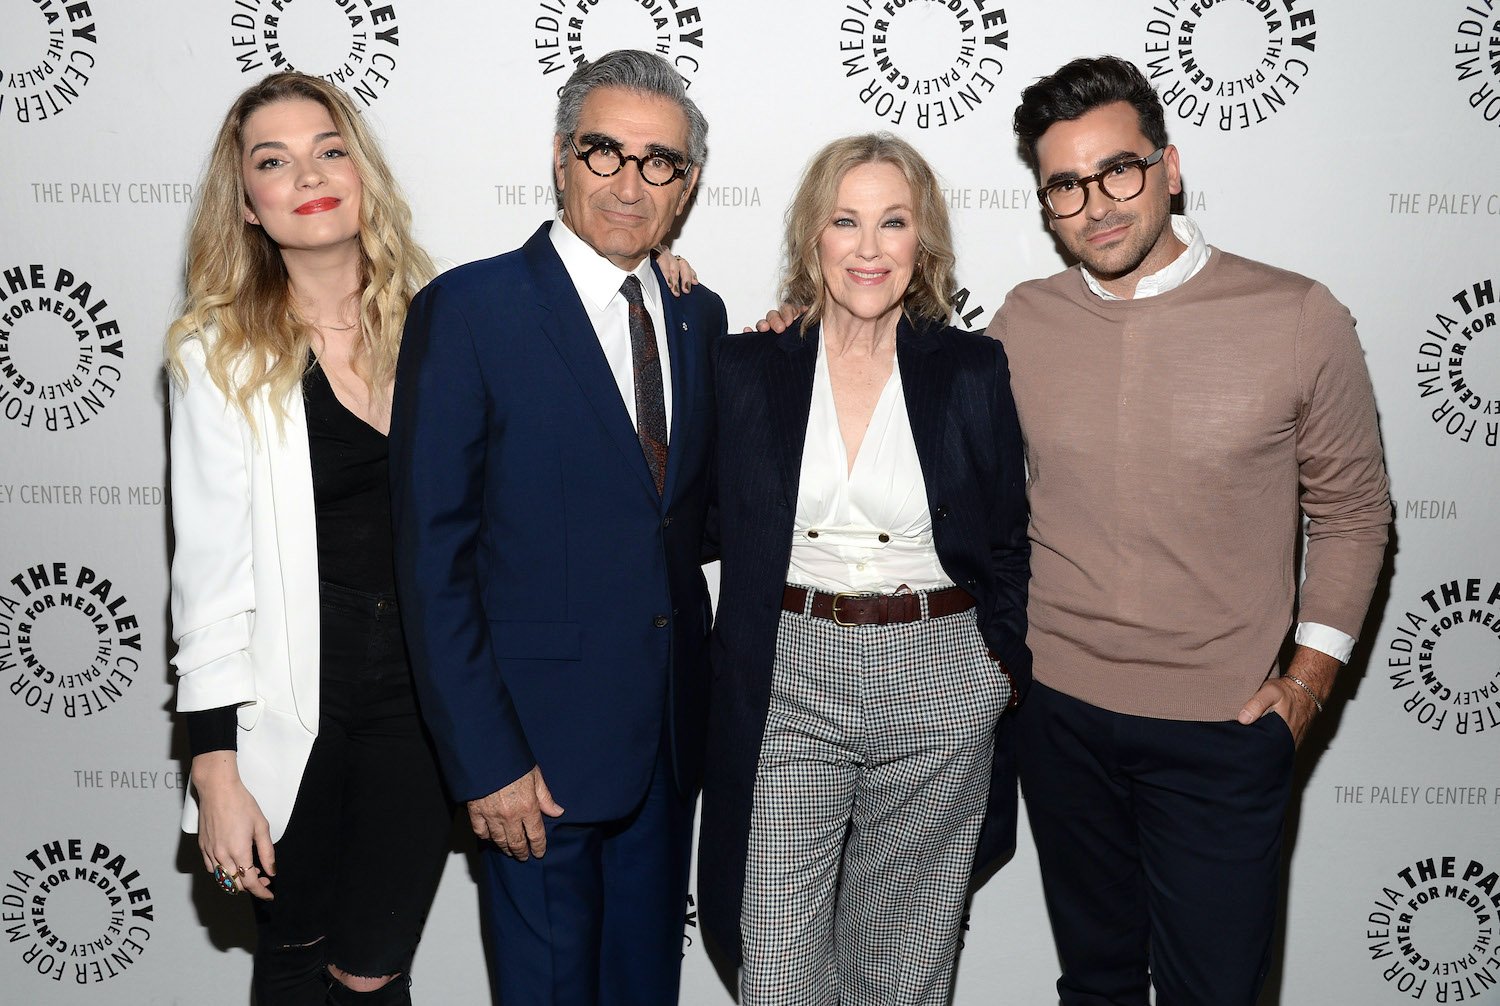 'Schitt's Creek' stars Annie Murphy, Eugene Levy, Catherine O'Hara, and Daniel Levy attend The Paley Center For Media Presents An Evening With "Schitt's Creek"